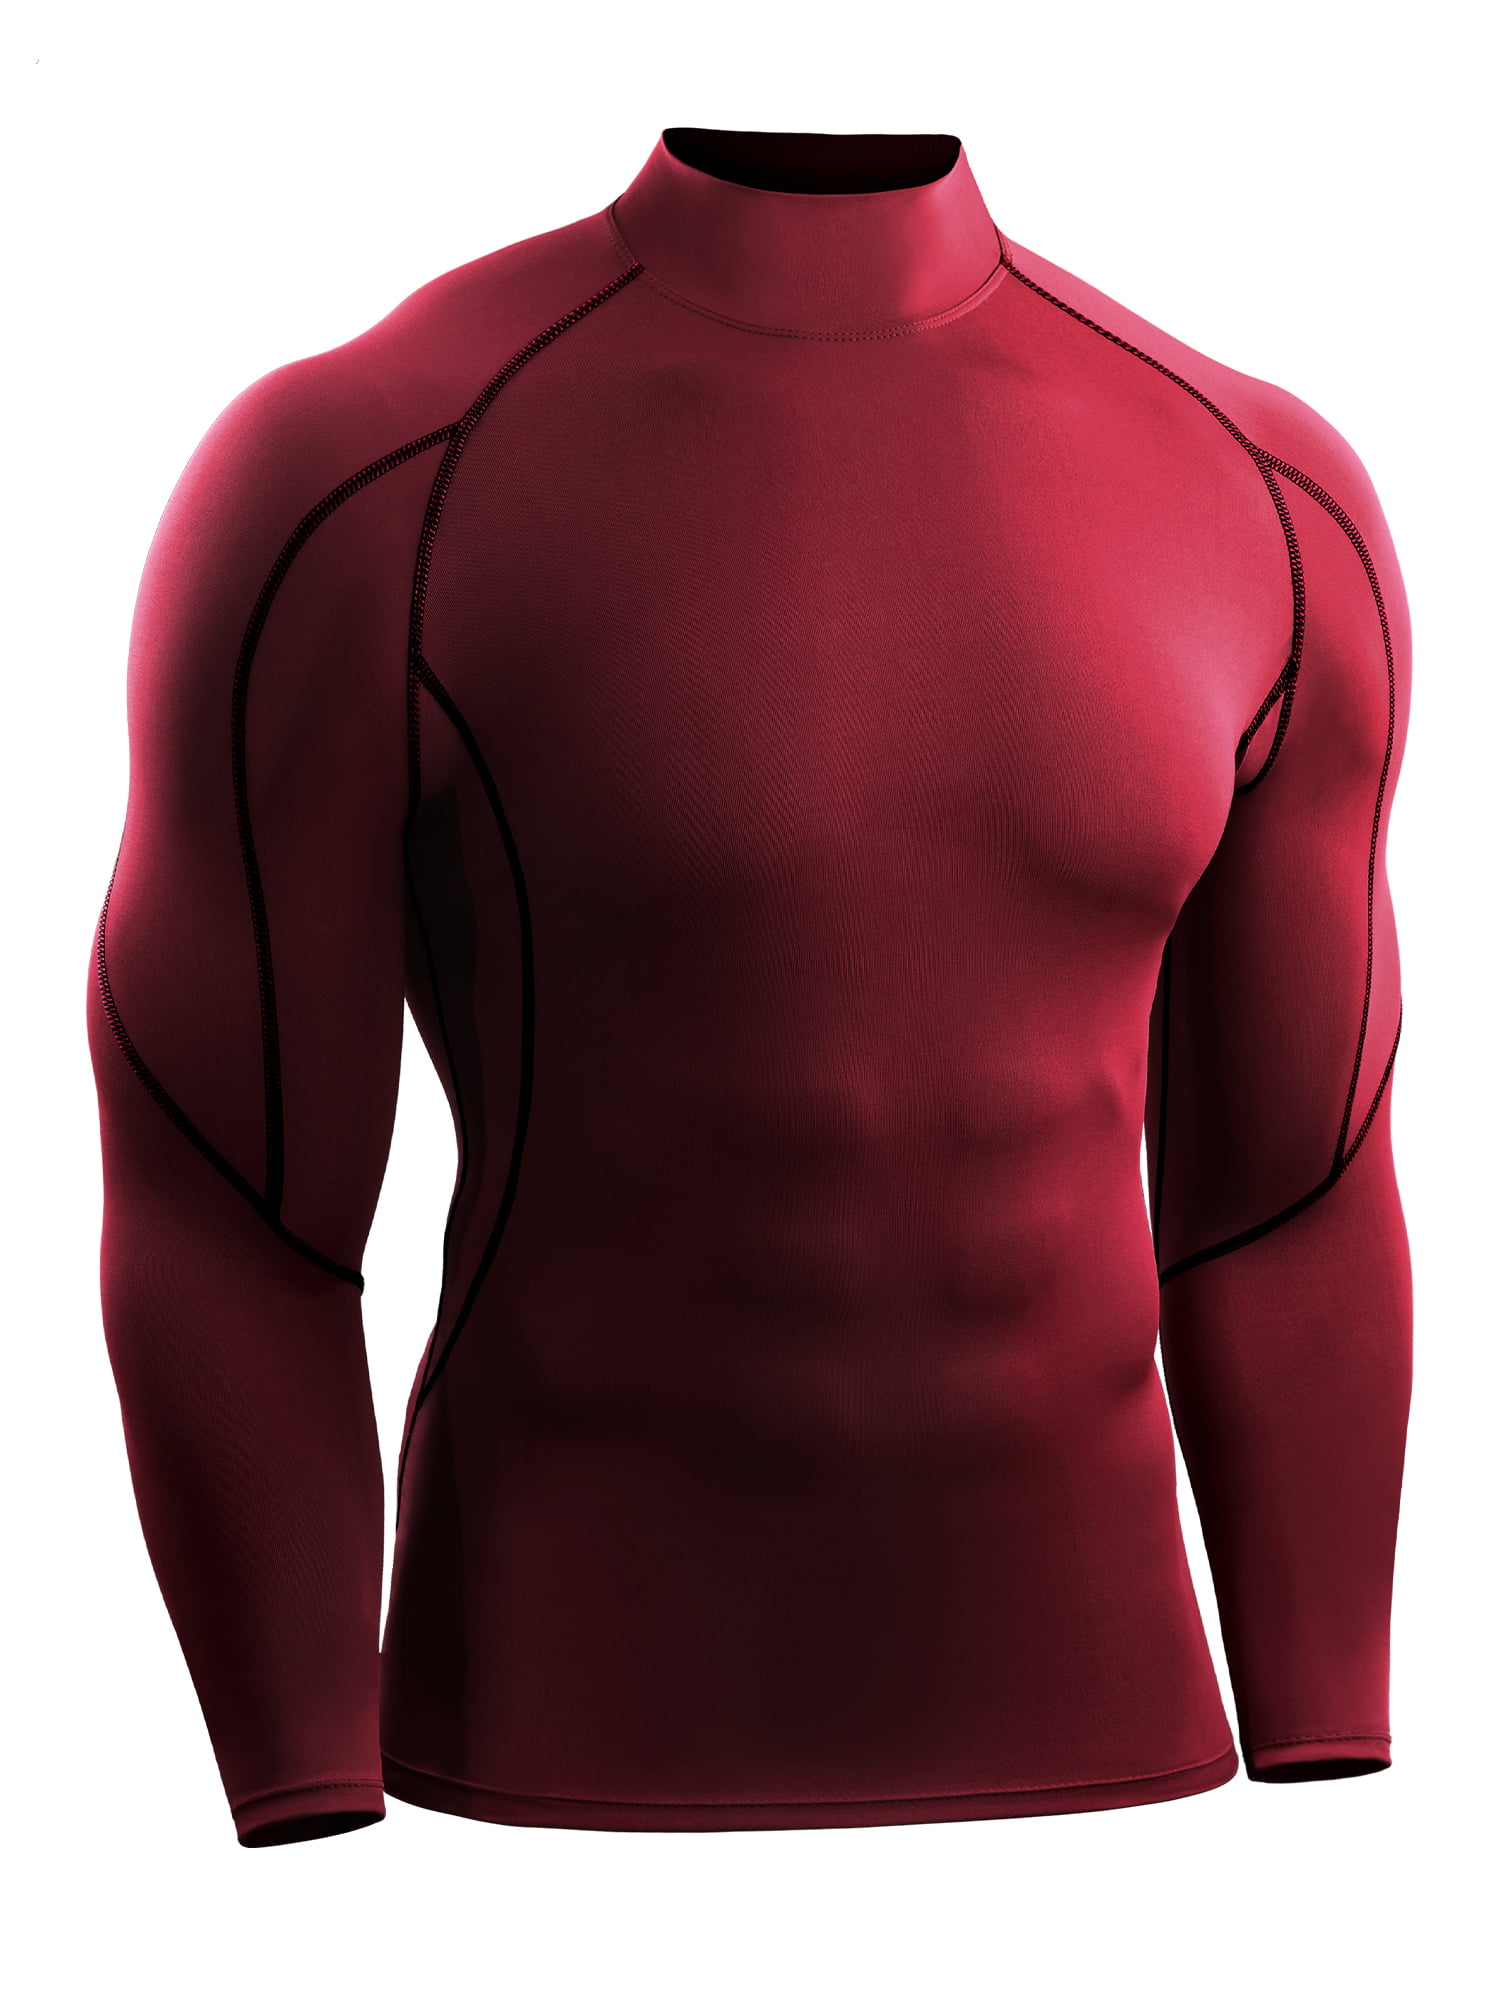 Men Compression Shirt Base Layer Long Sleeve Undershirt for Men Sport Fitness Cool Dry